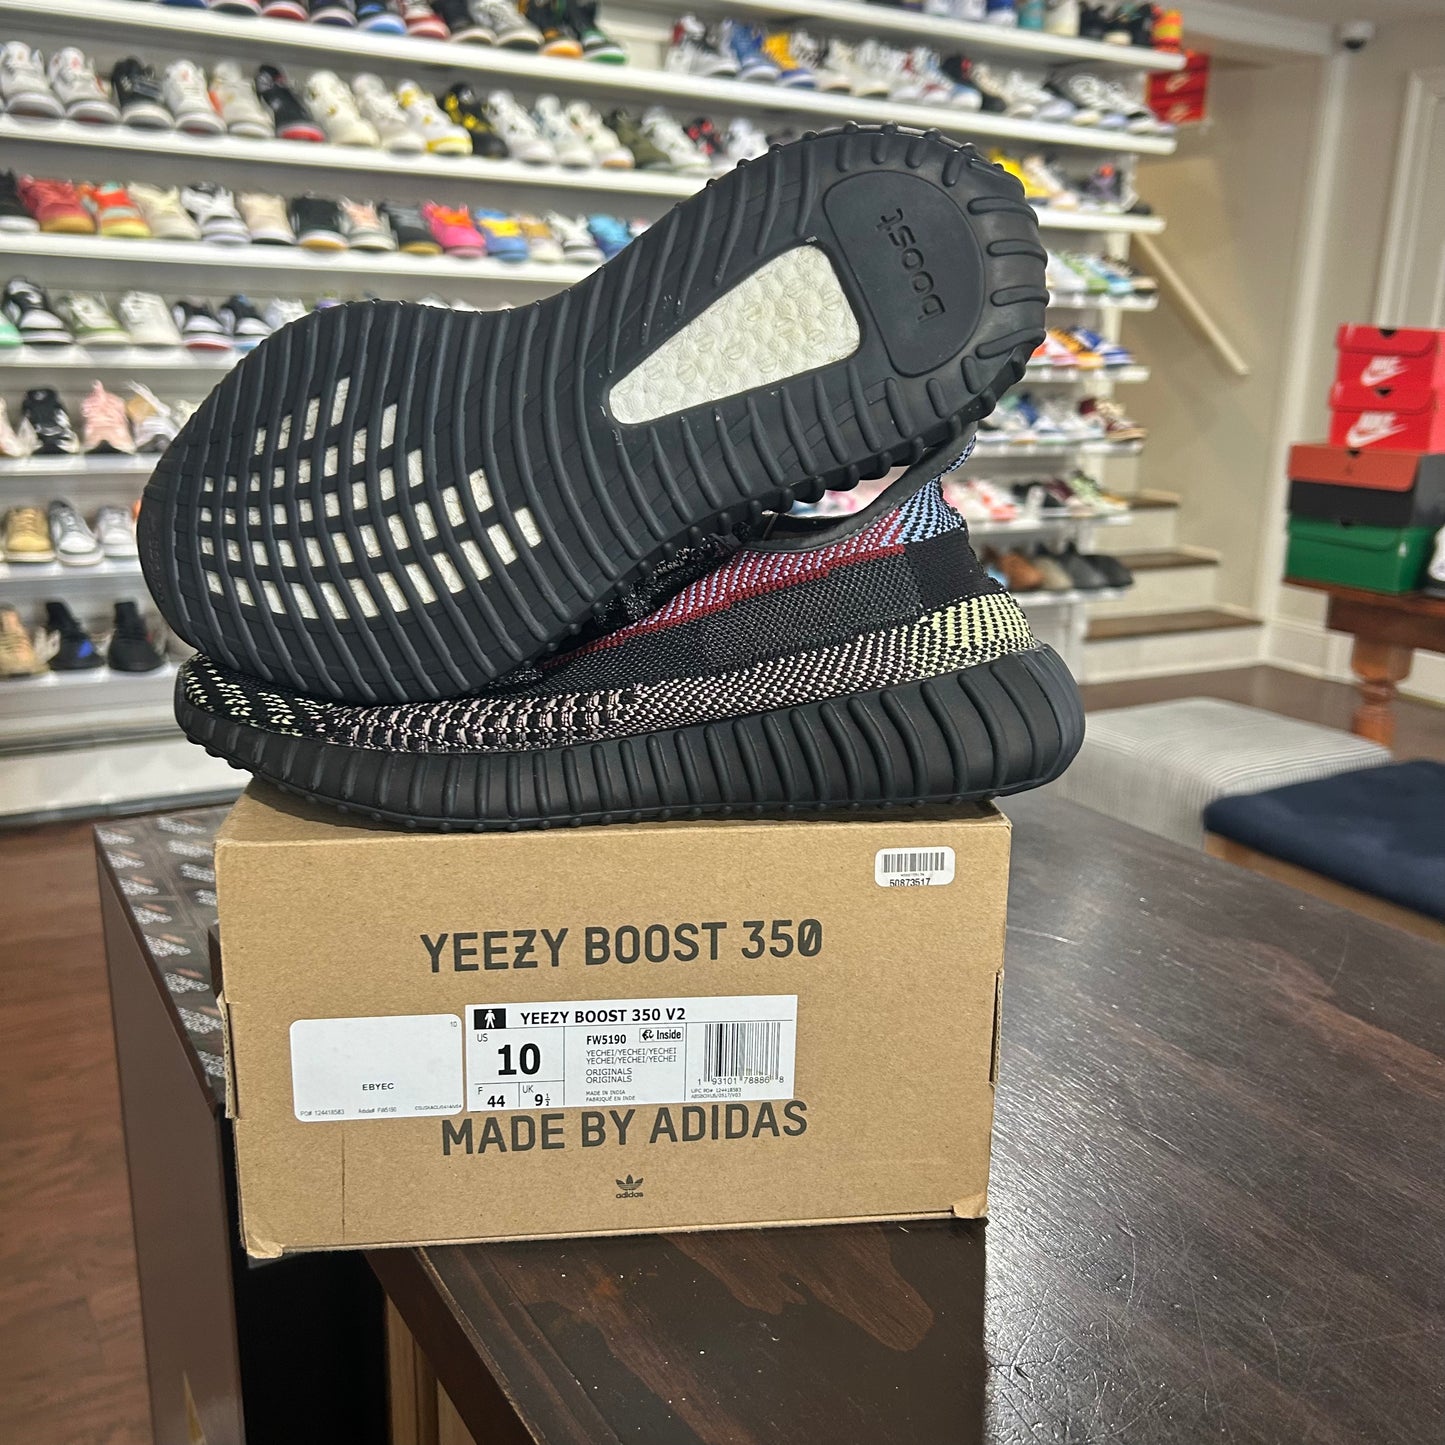 *USED* Yeezy Boost 350 Yecheil (Size 10) VNDS